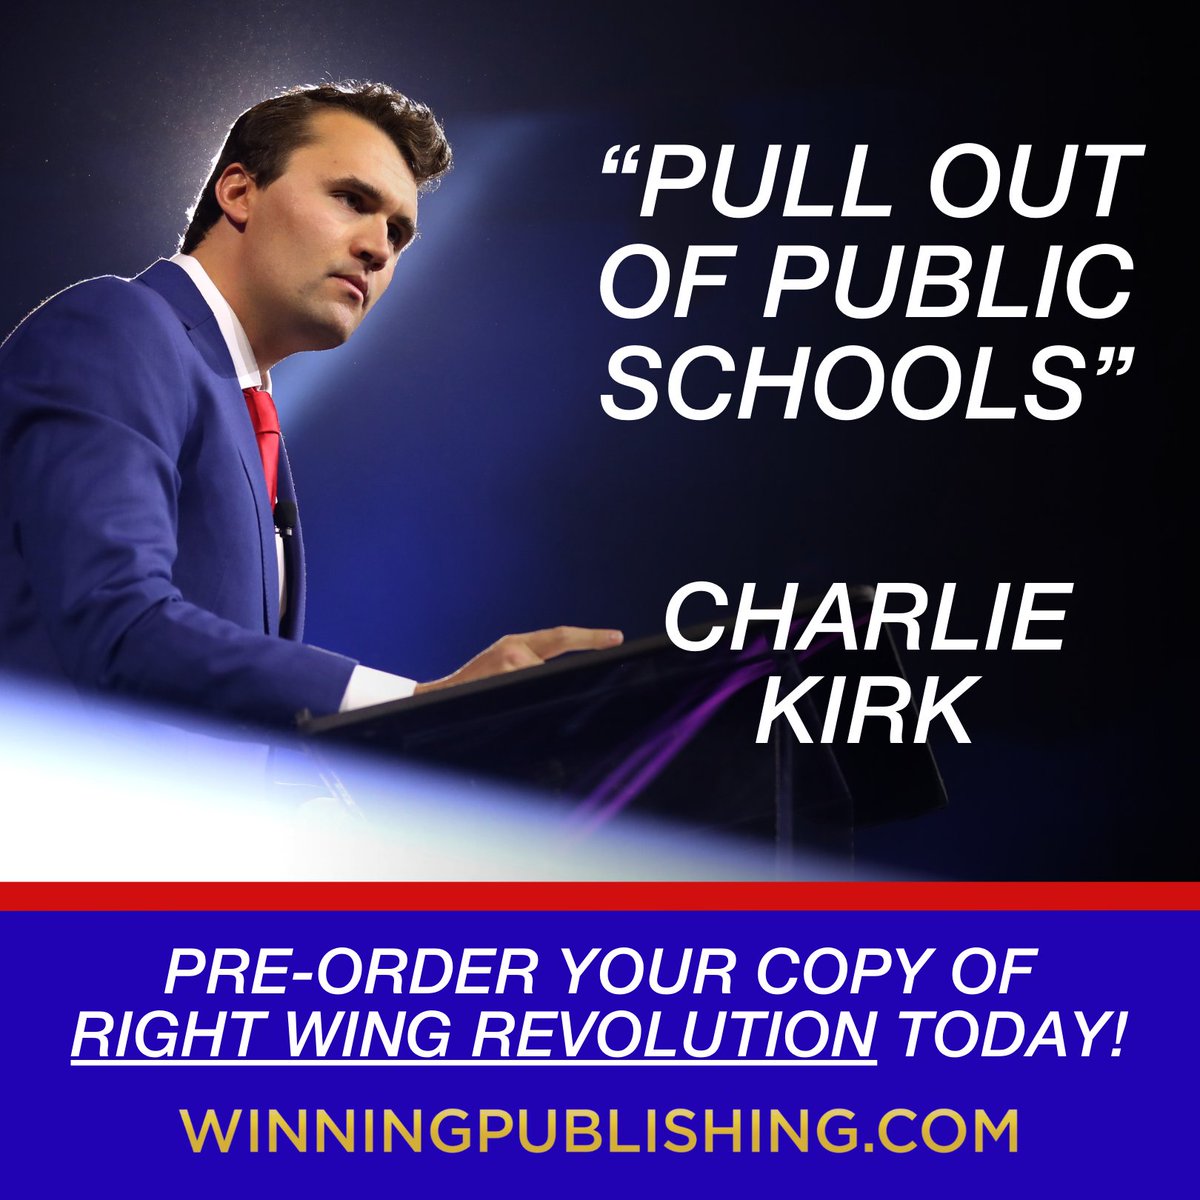 RIGHT WING REVOLUTION is coming - pre-order your copy of @charliekirk11's new book today!